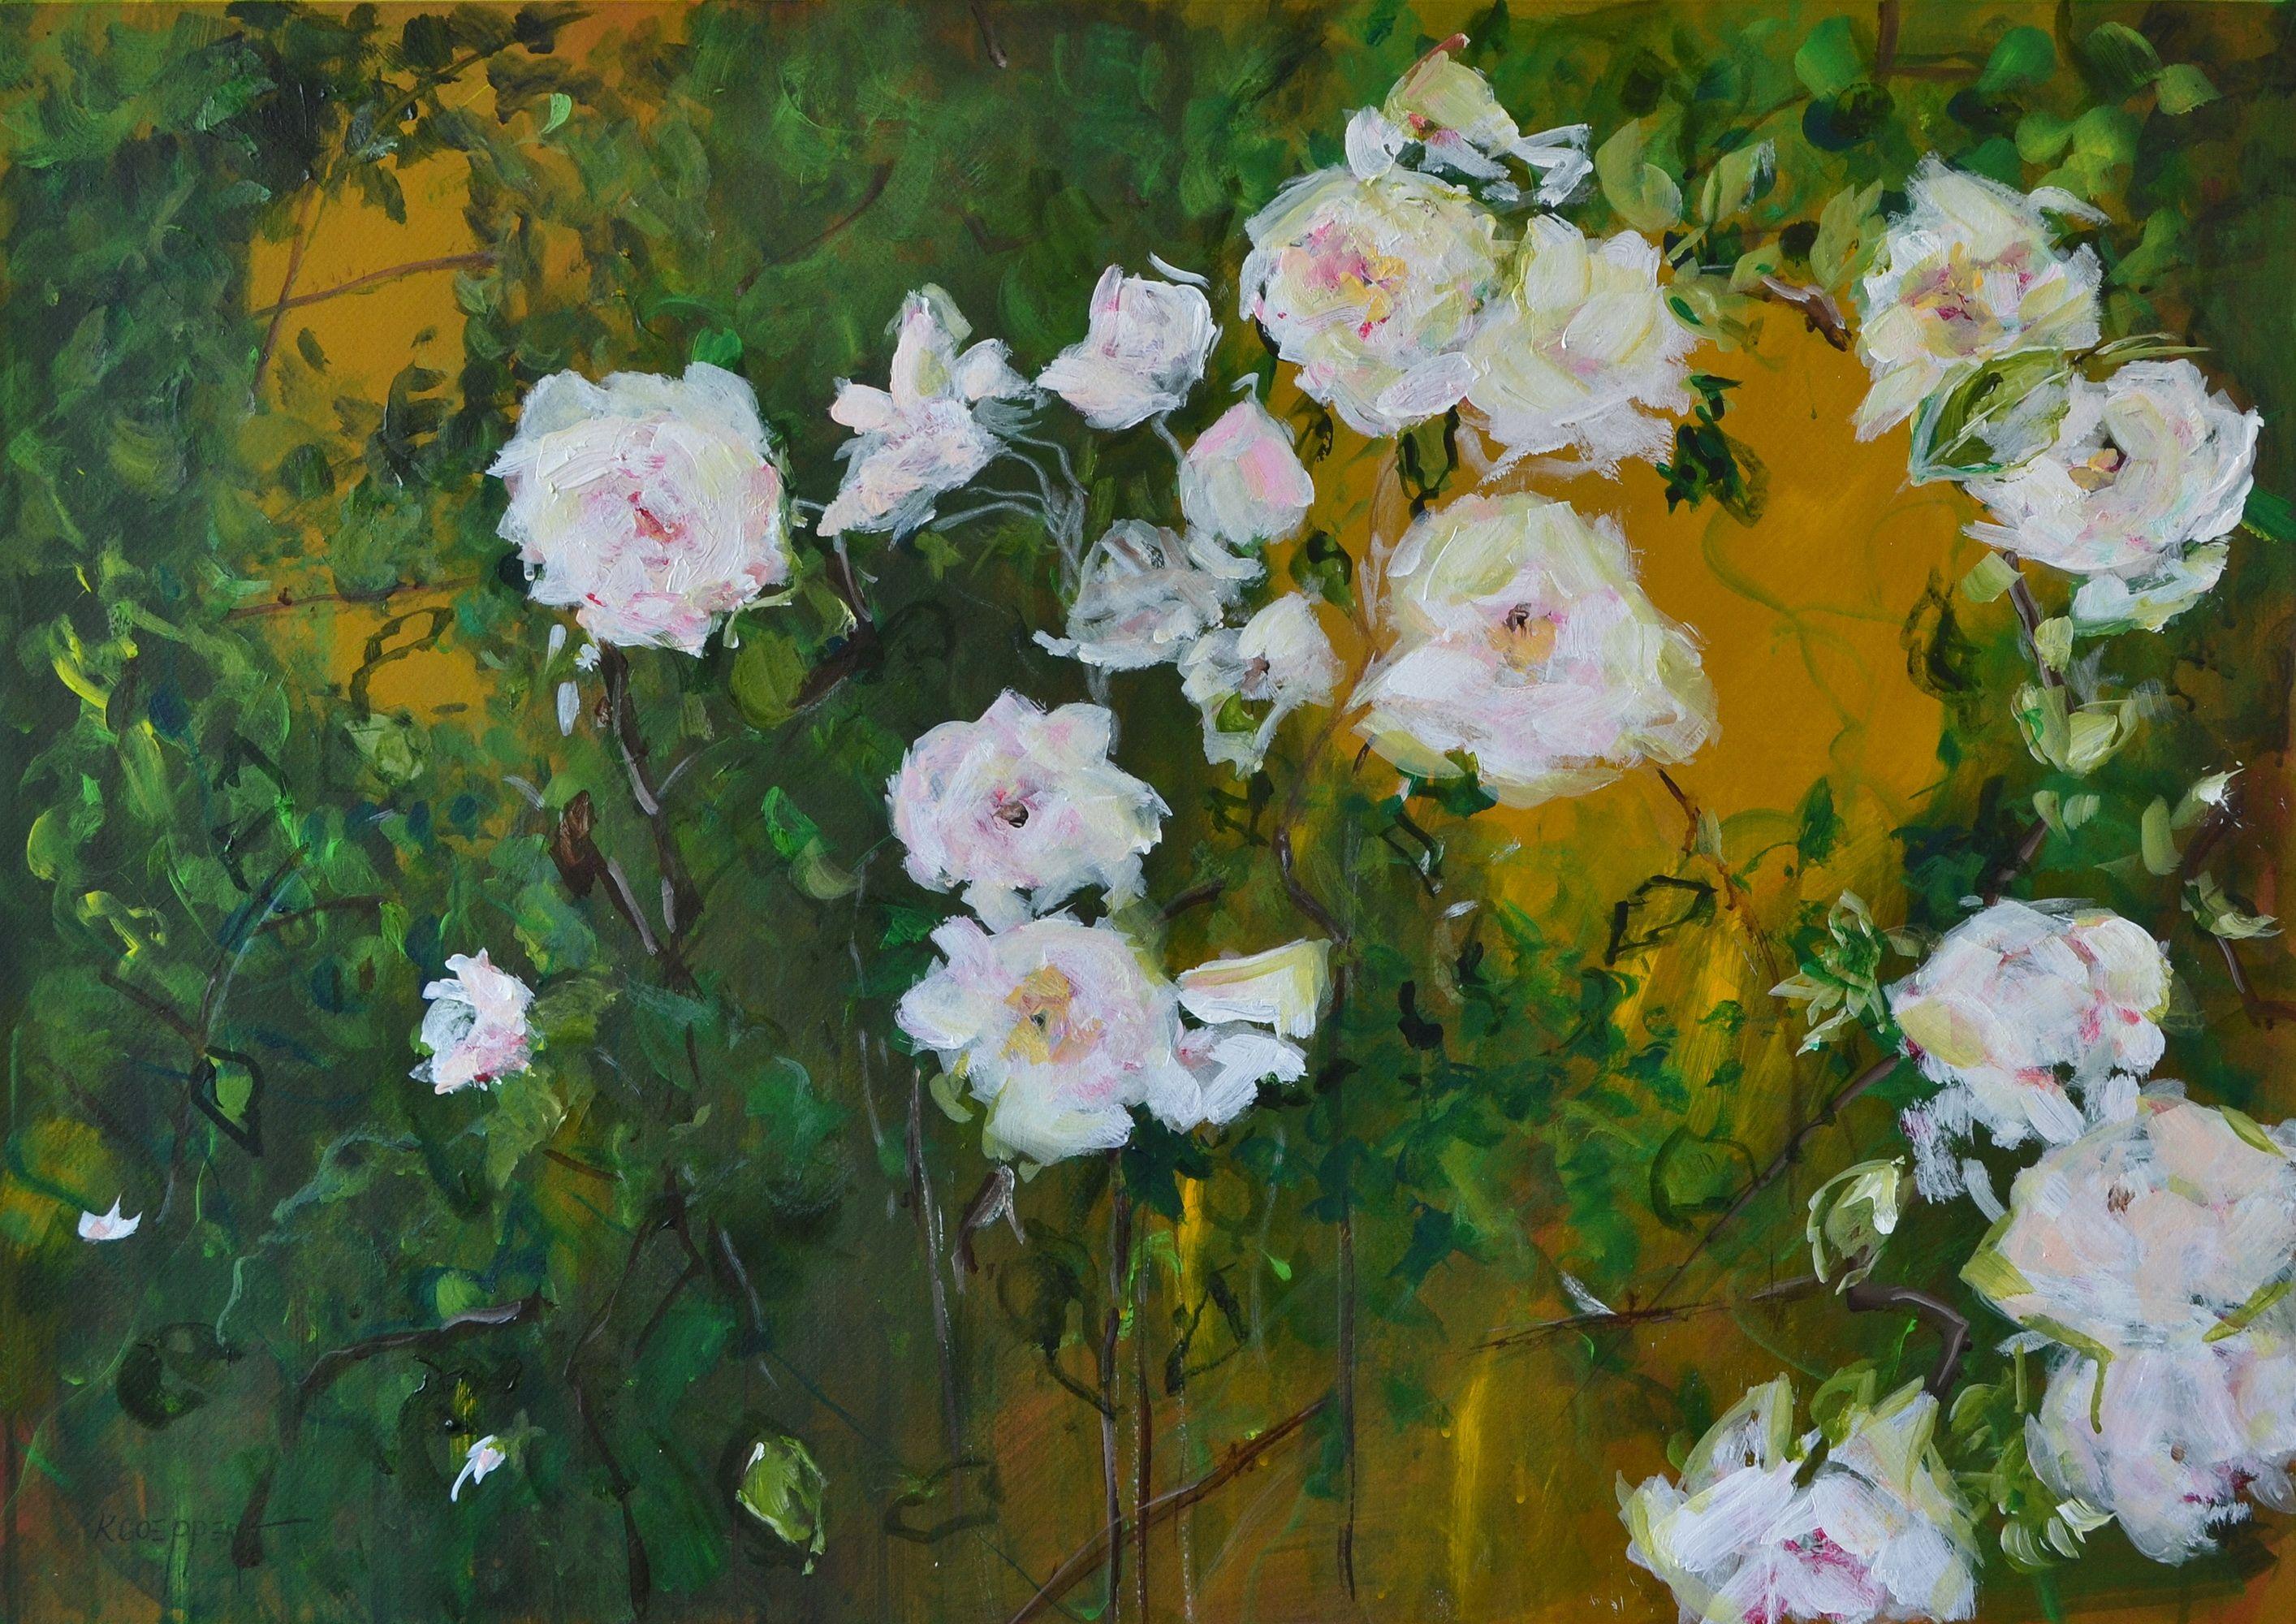 â€žRose Cottageâ€œ  is a middle-sized acrylic floral painting on heavy mat-board.  The main colors are yellow, white, green and a light pink. I worked with glazes and fine brush strokes.   The work needs a frame to be hung on the wall. The frame in